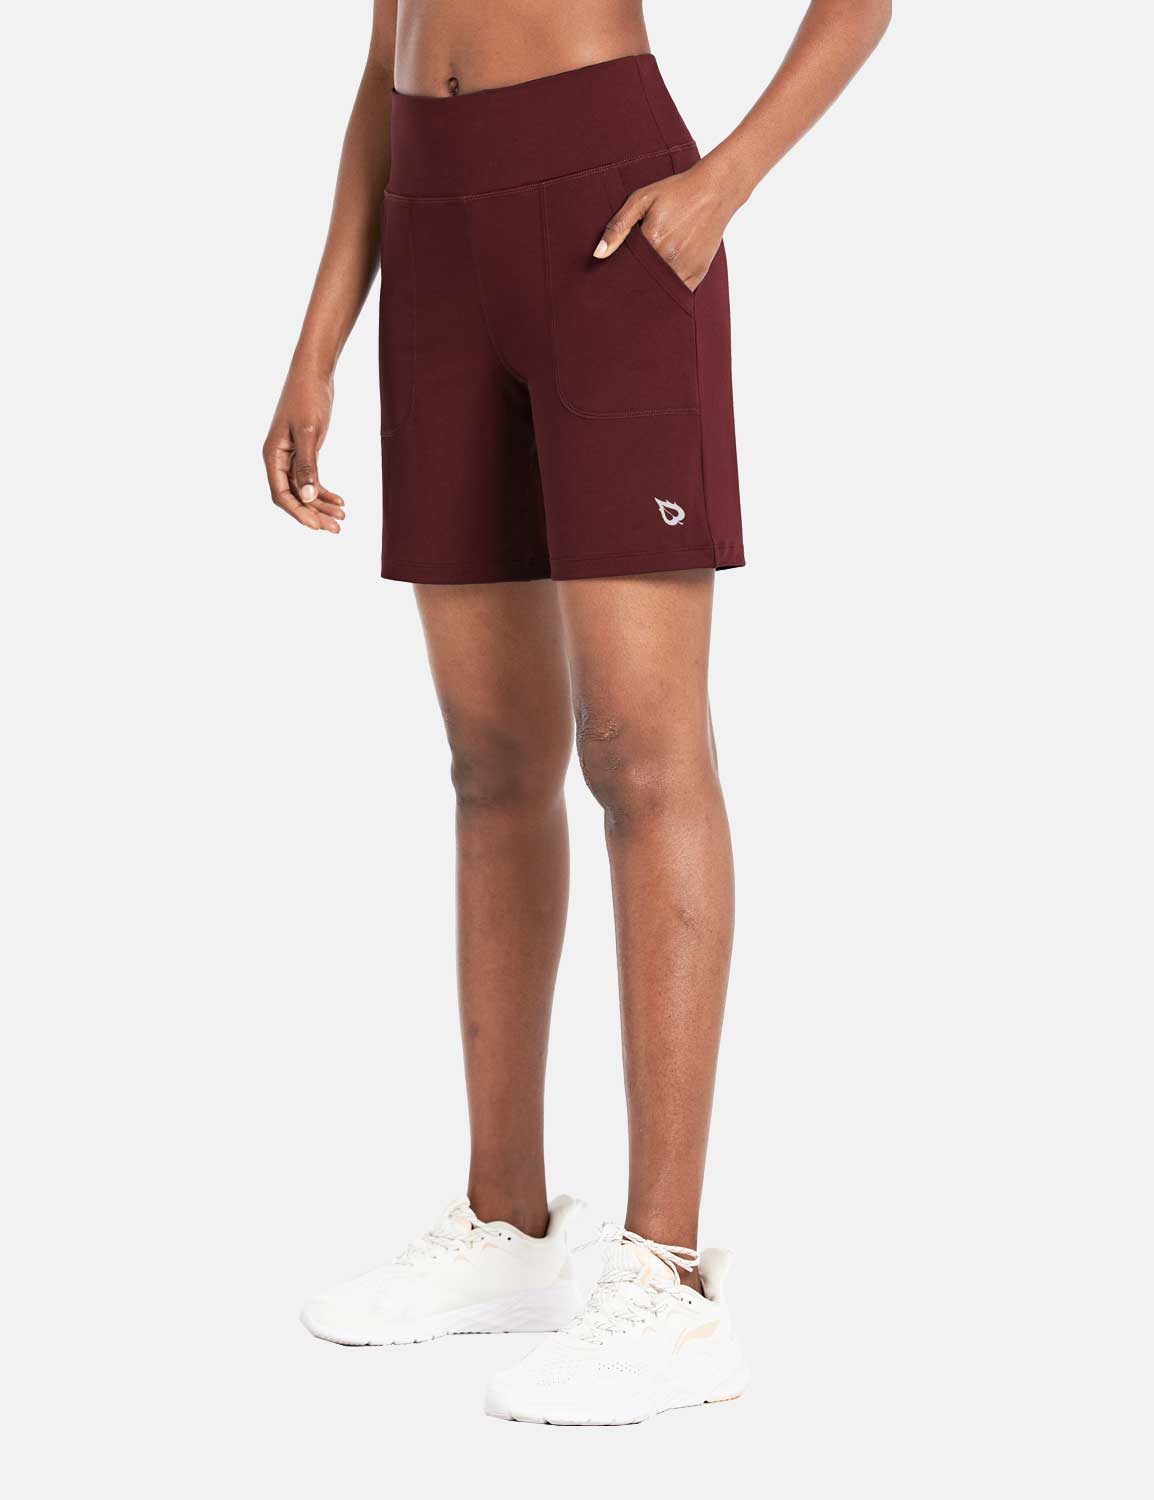 Baleaf Women's High Rise Athletic Relaxed Fit Pocketed Shorts Chocolate Truffle Side